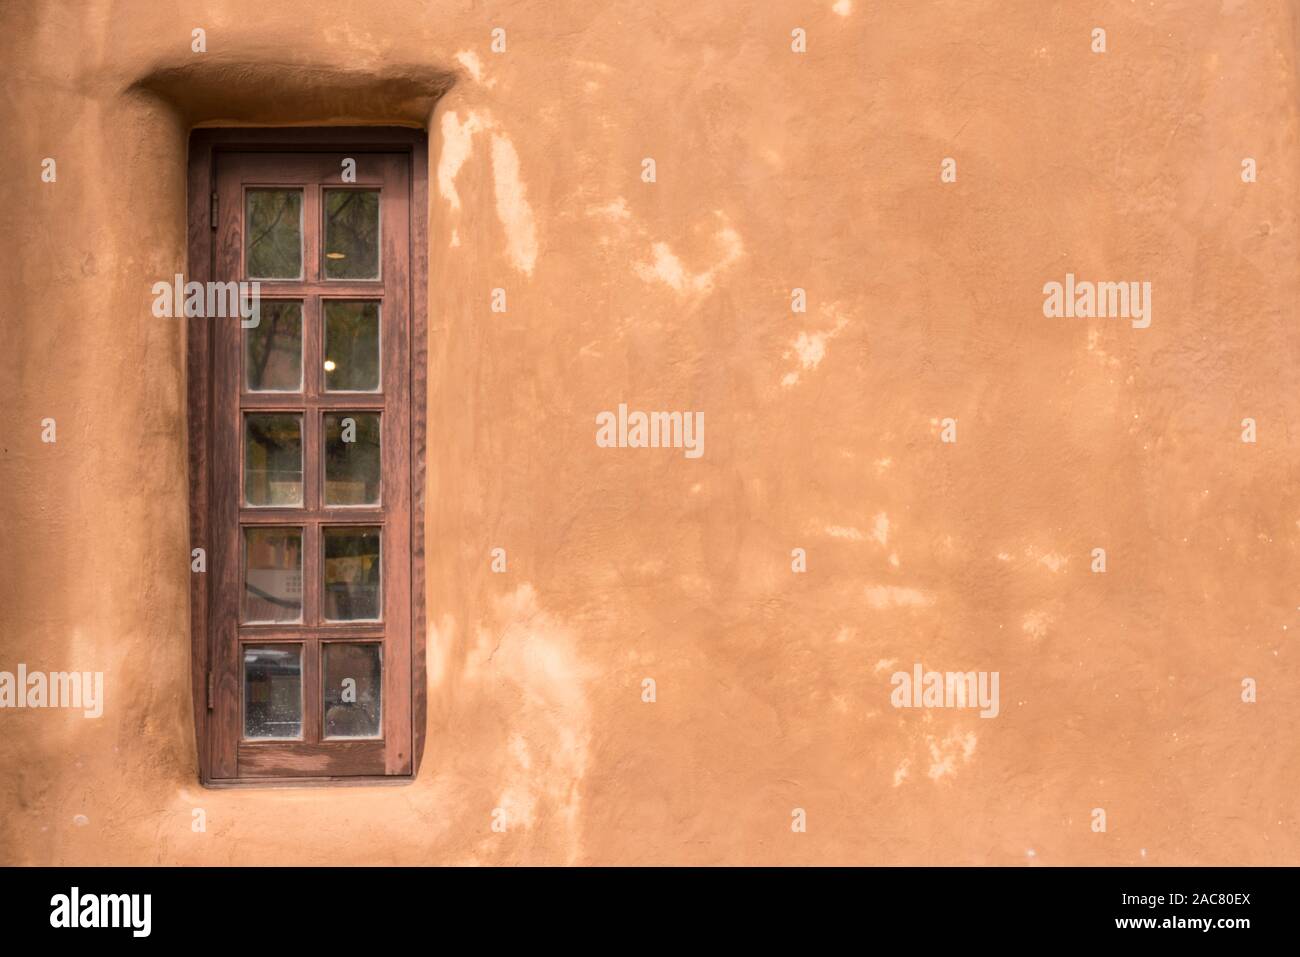 Old Southwestern Brown Adobe Wall and Window Stock Photo